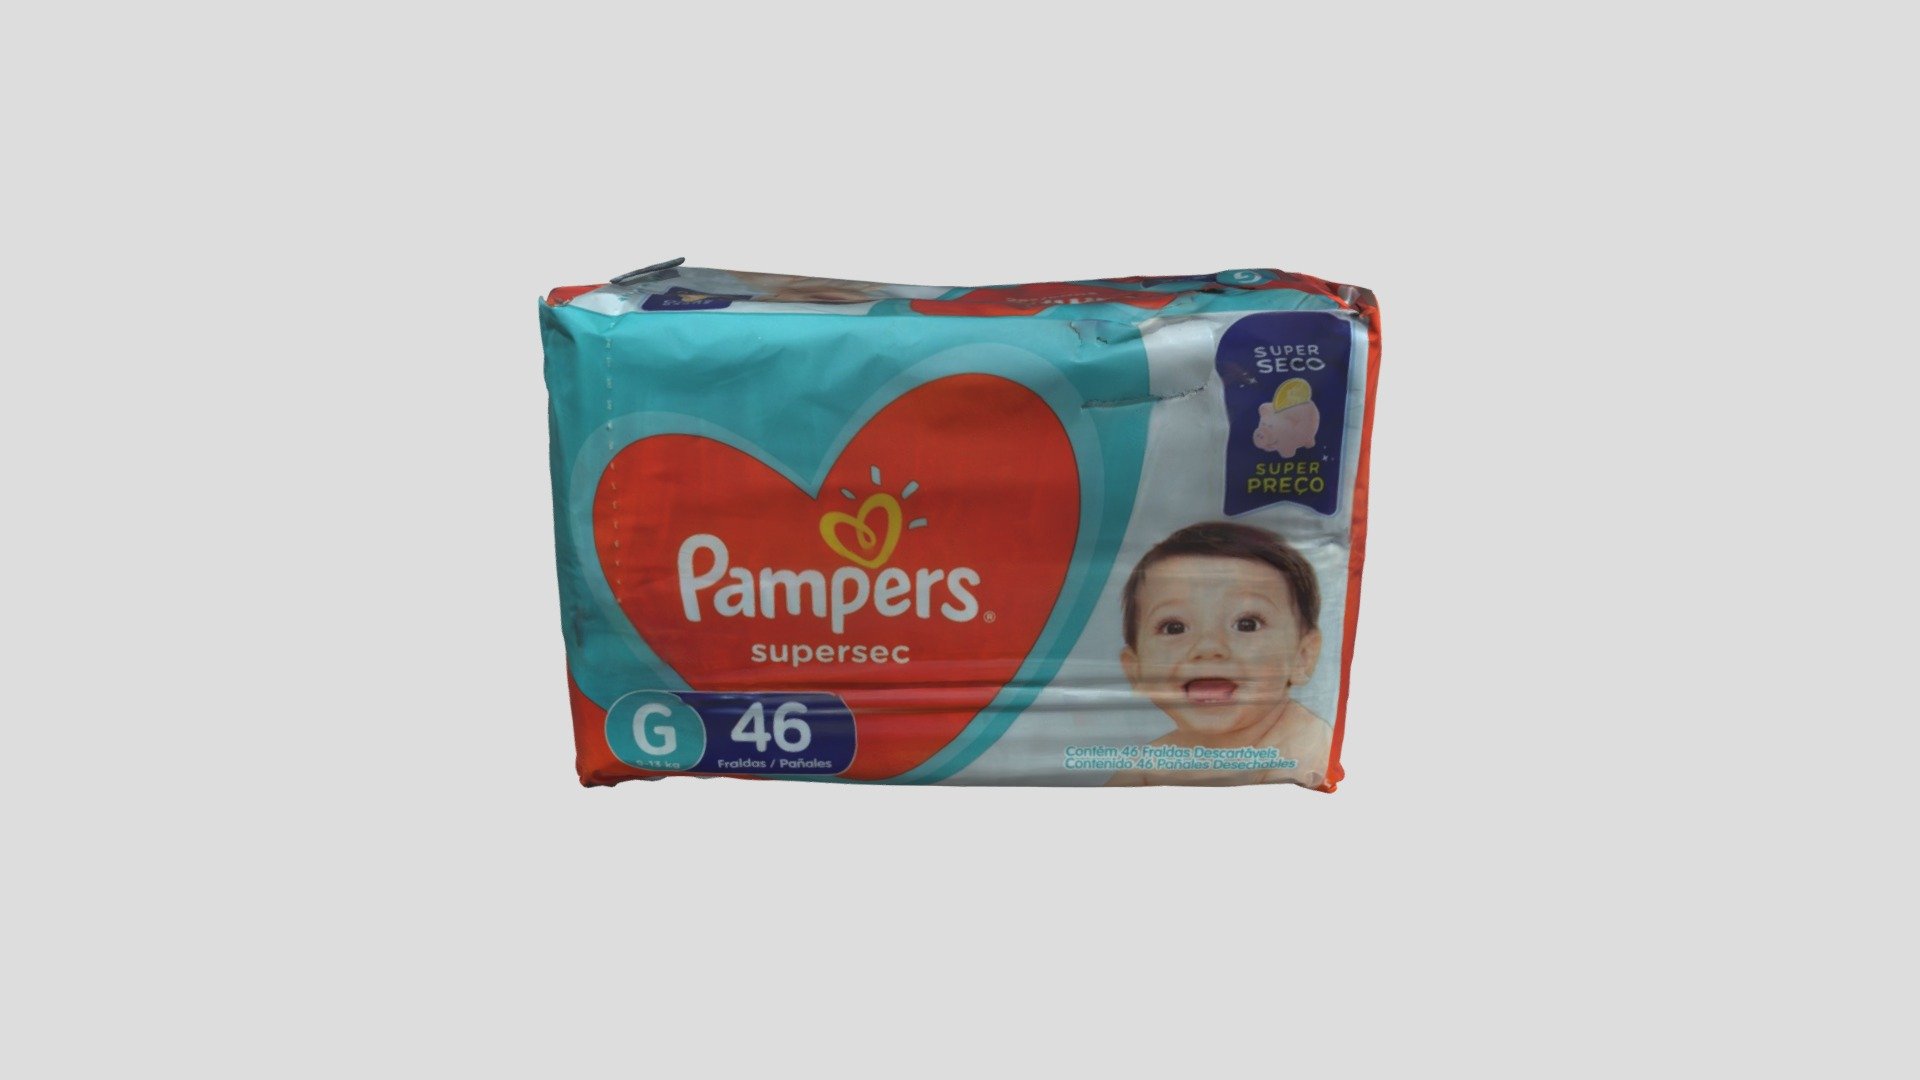 PROCTER - (B) Pampers supersec 46 und - 3D model by 42LabsCS 3d model